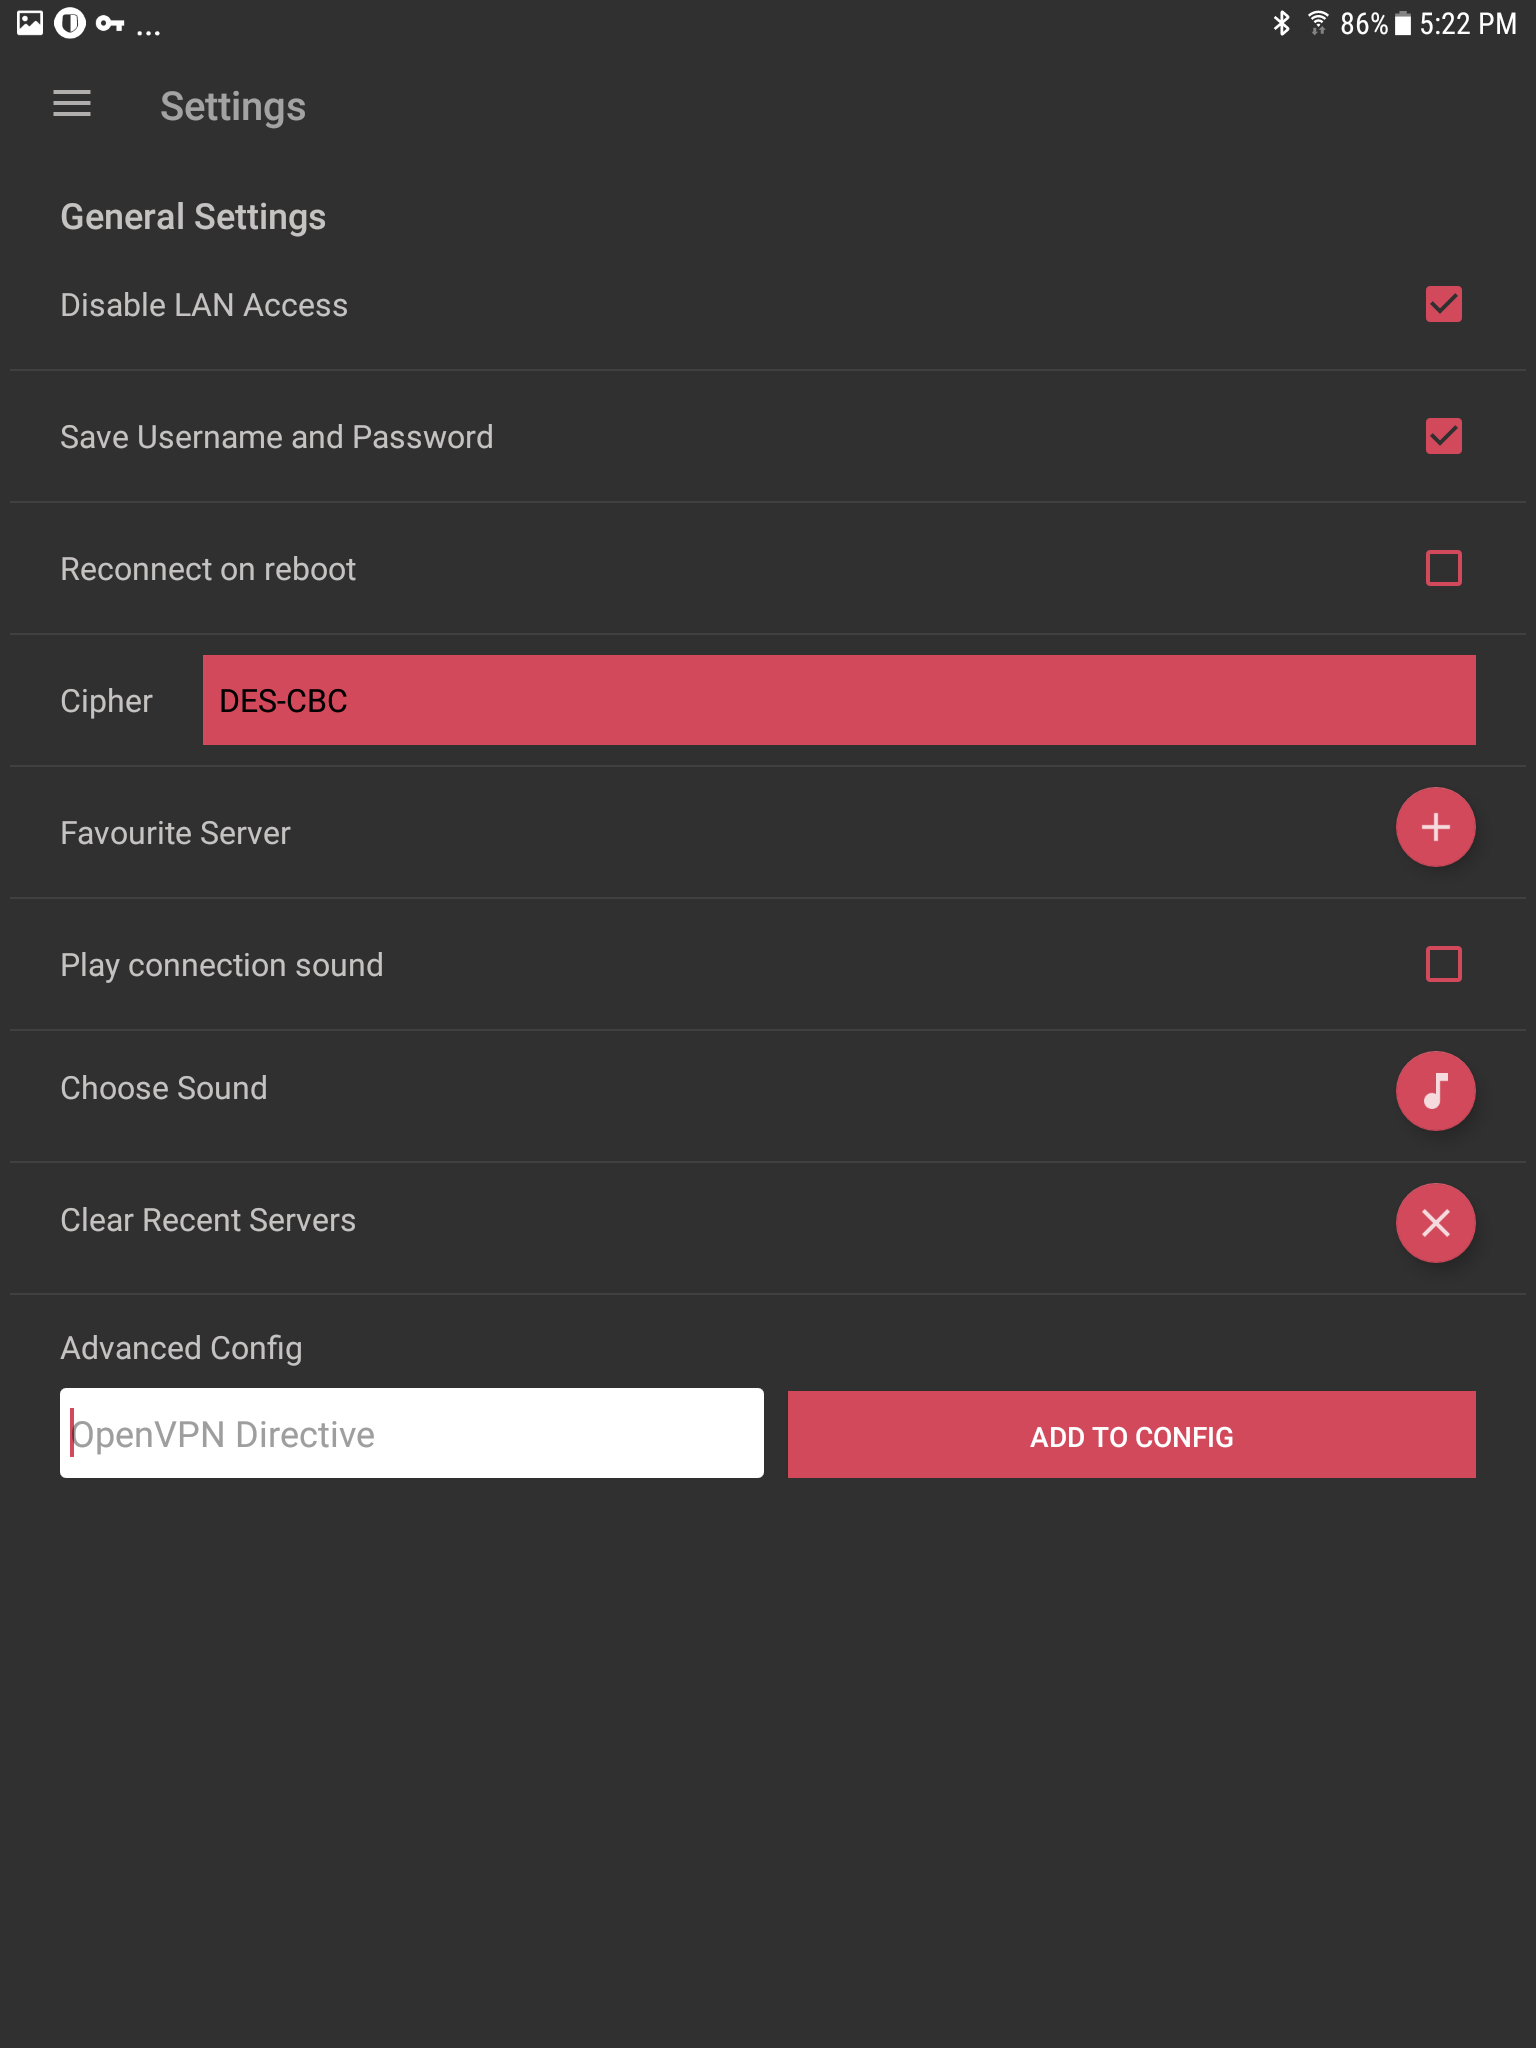 ZSVPN | Android App Review | Settings Menu | GiveMeApps